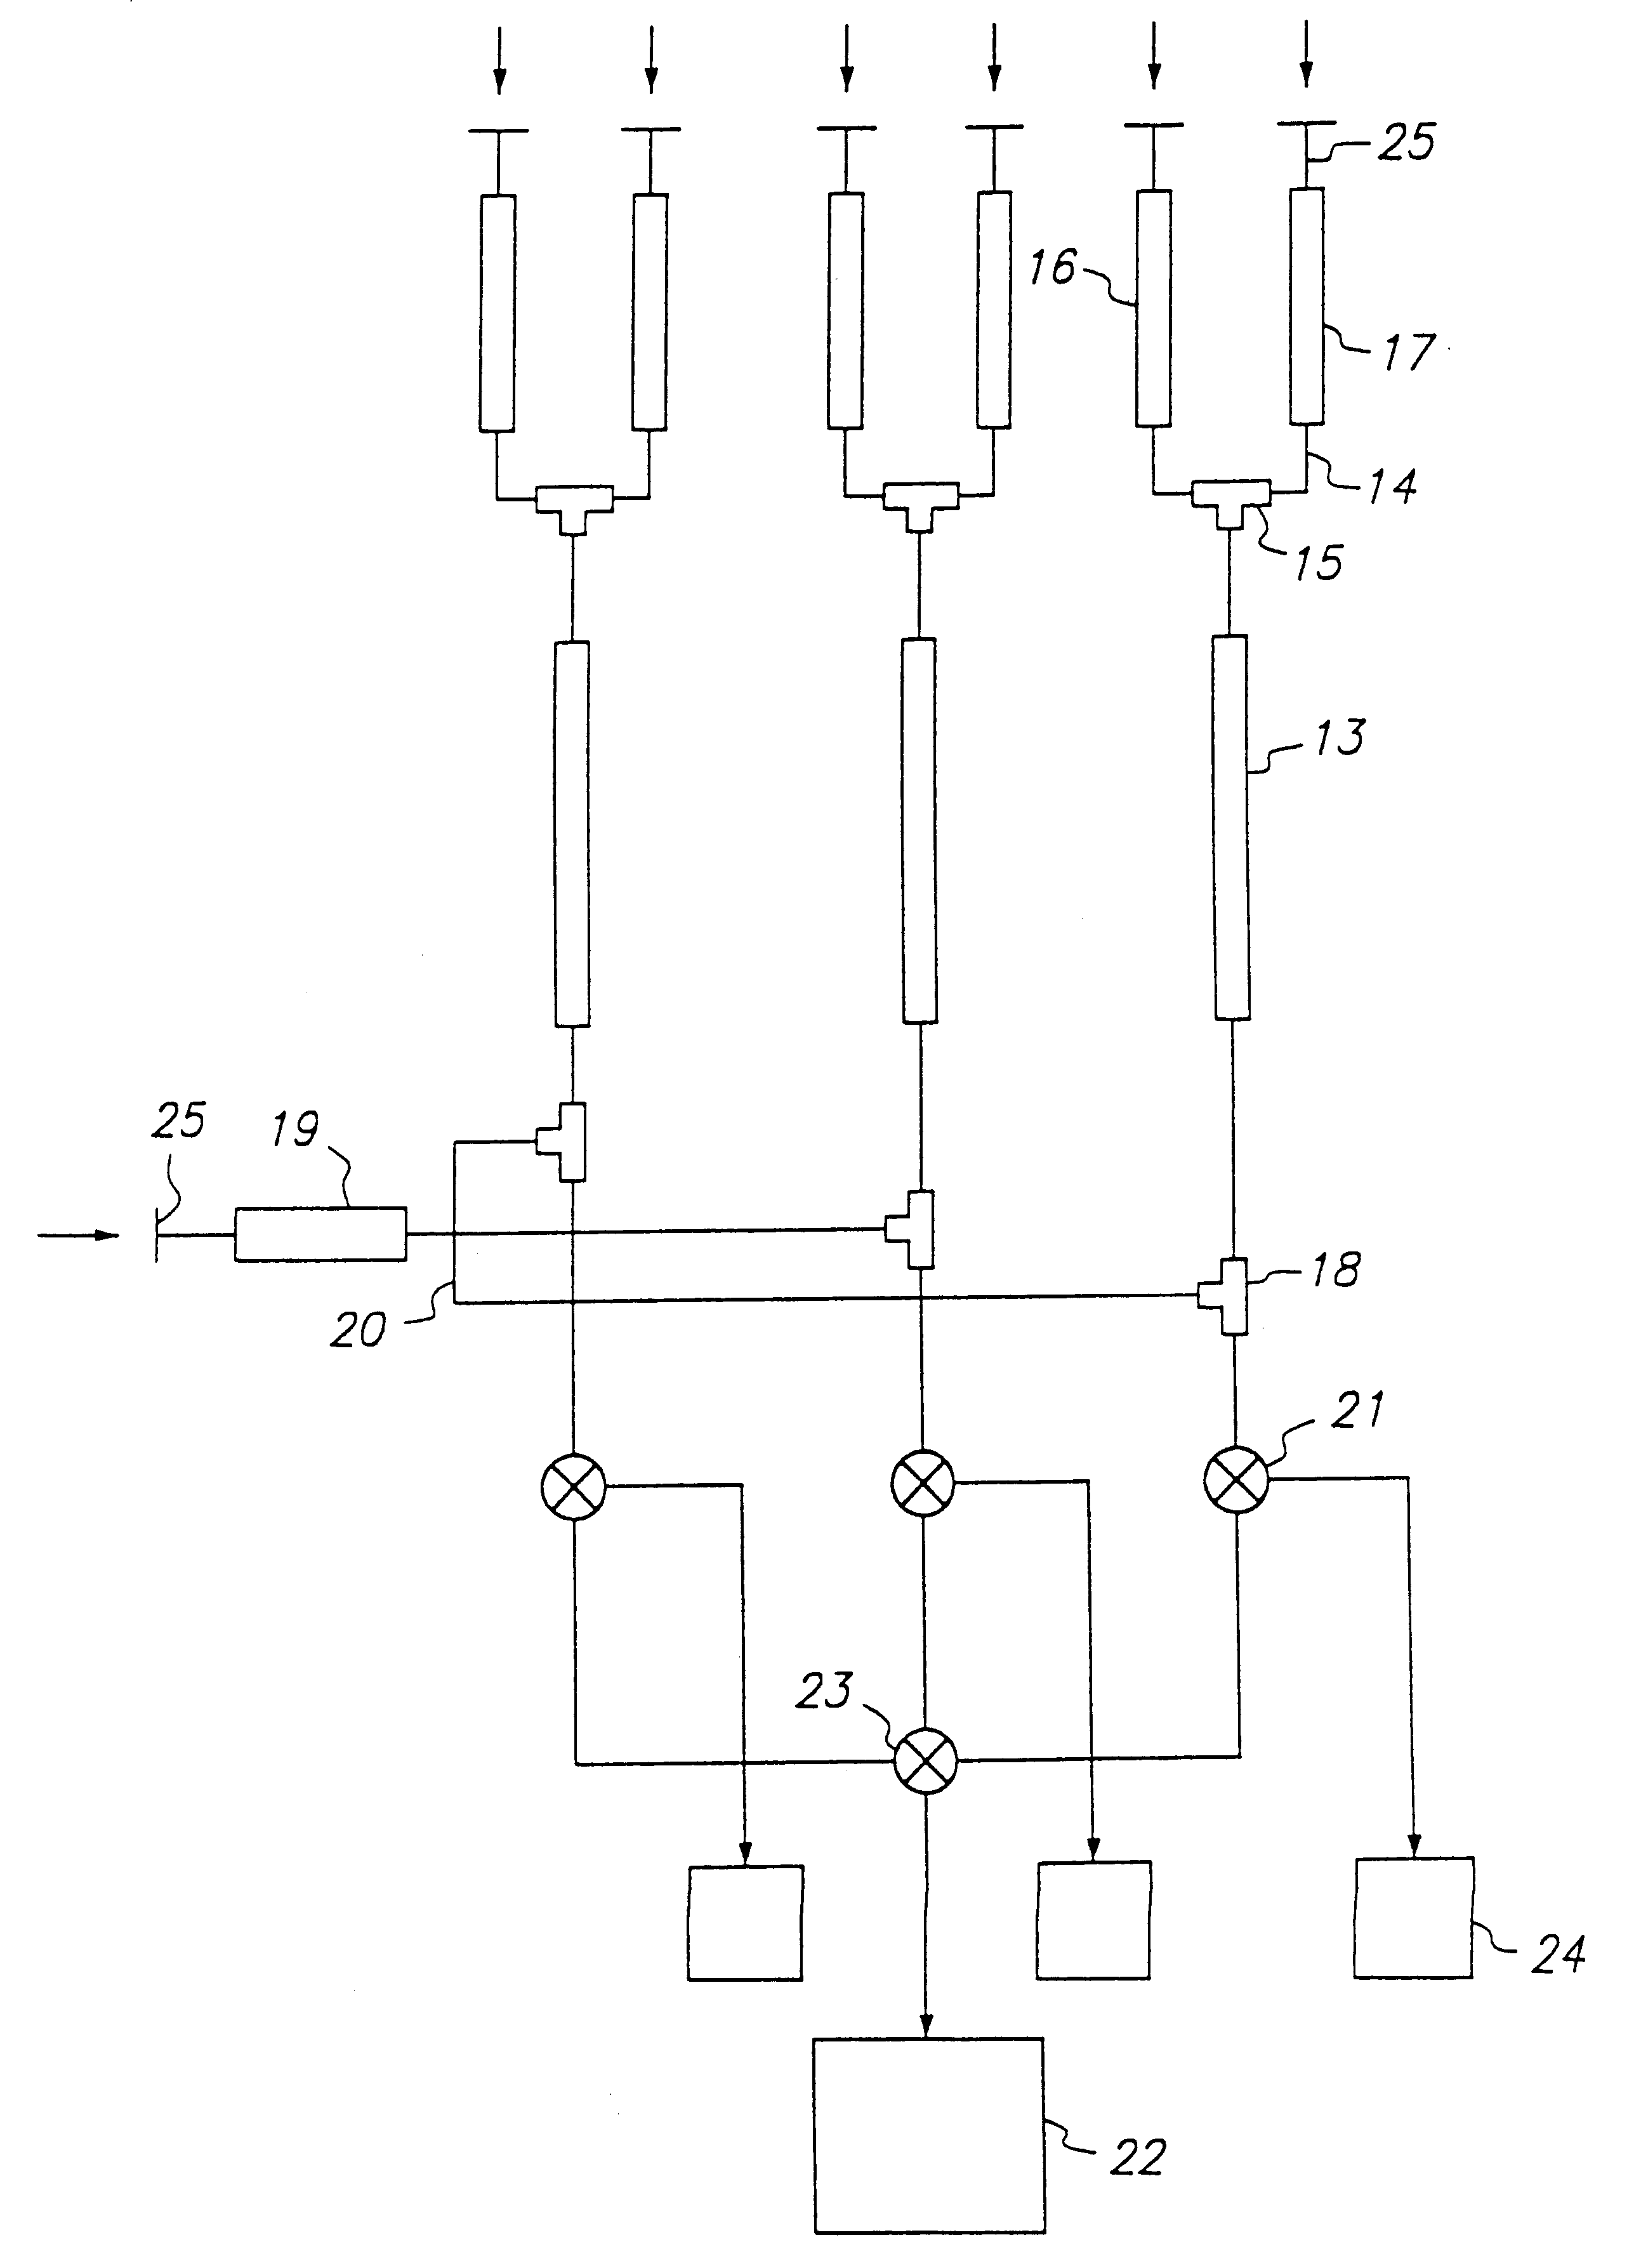 Apparatus for screening compound libraries